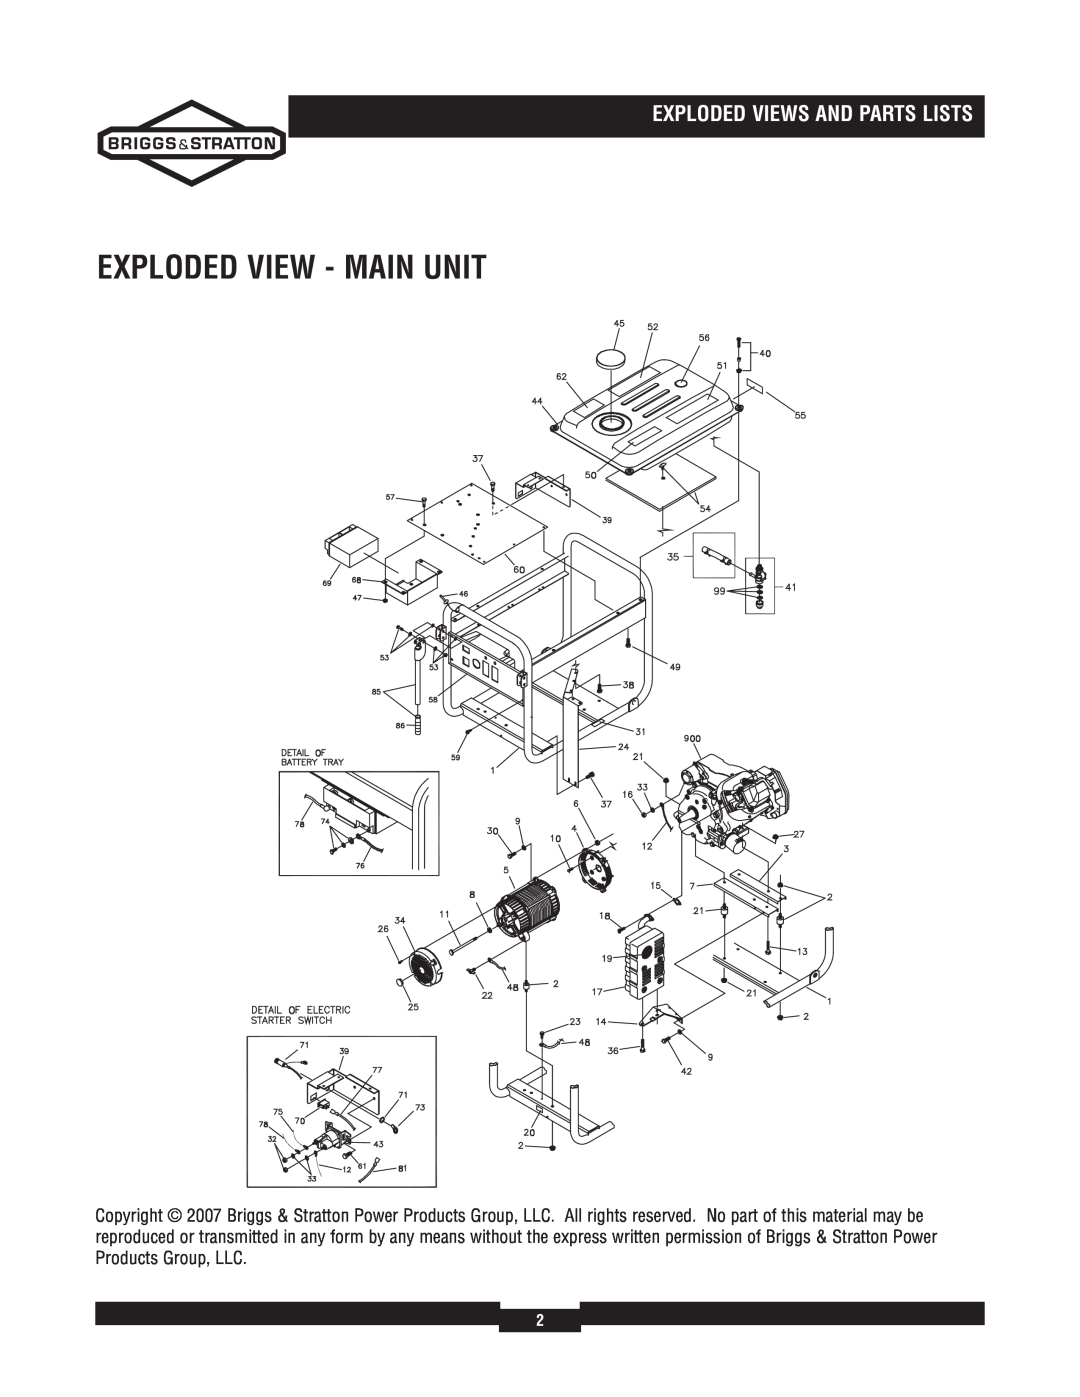 Briggs & Stratton 030244-02 manual Exploded View - Main Unit, Exploded Views And Parts Lists 